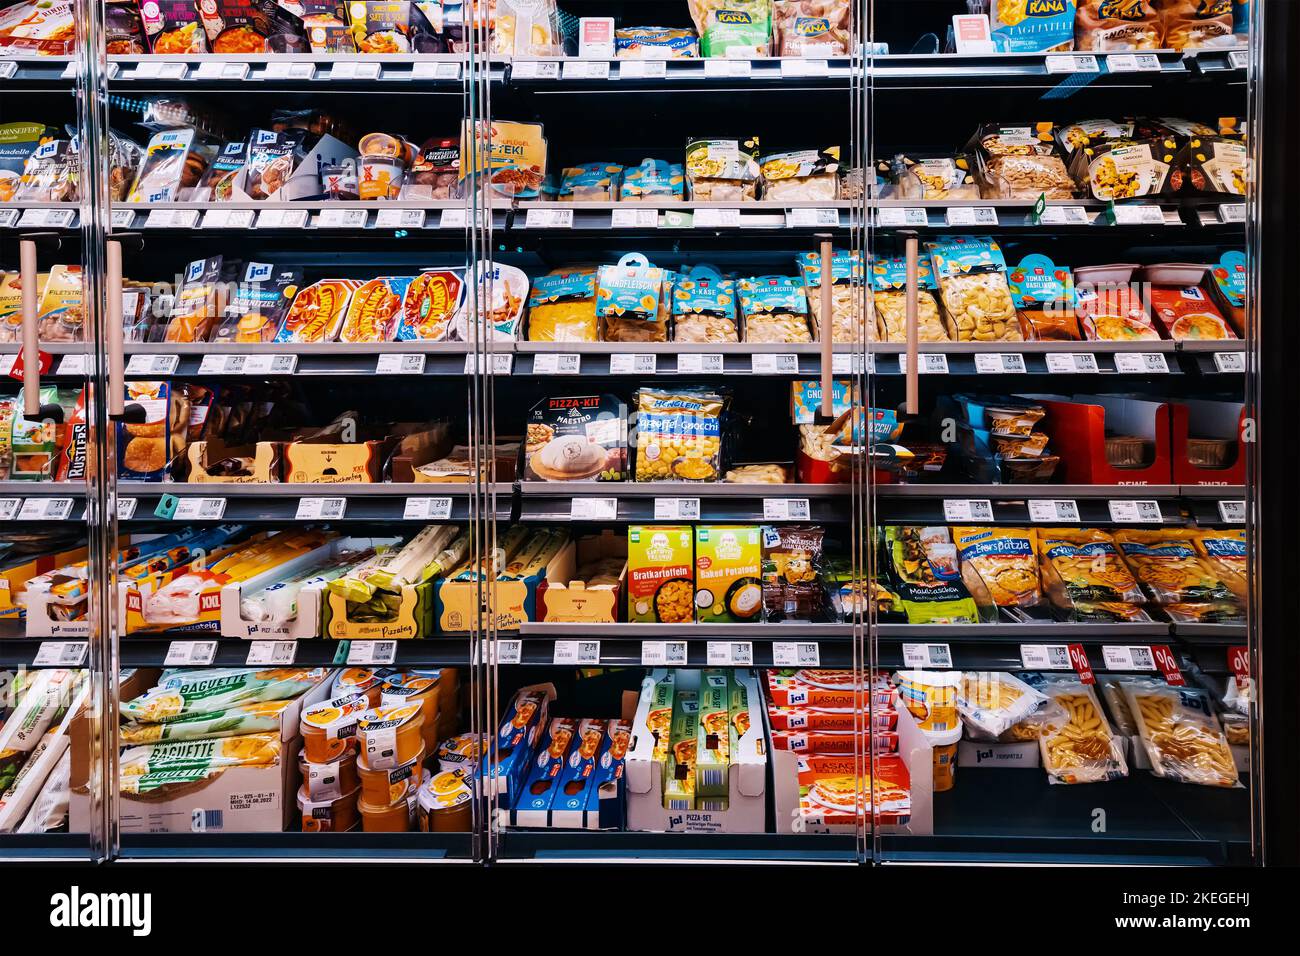 25 July 2022, Munster, Germany: Various goods and food on the shelf of a fridge in supermarket or grocery store Stock Photo